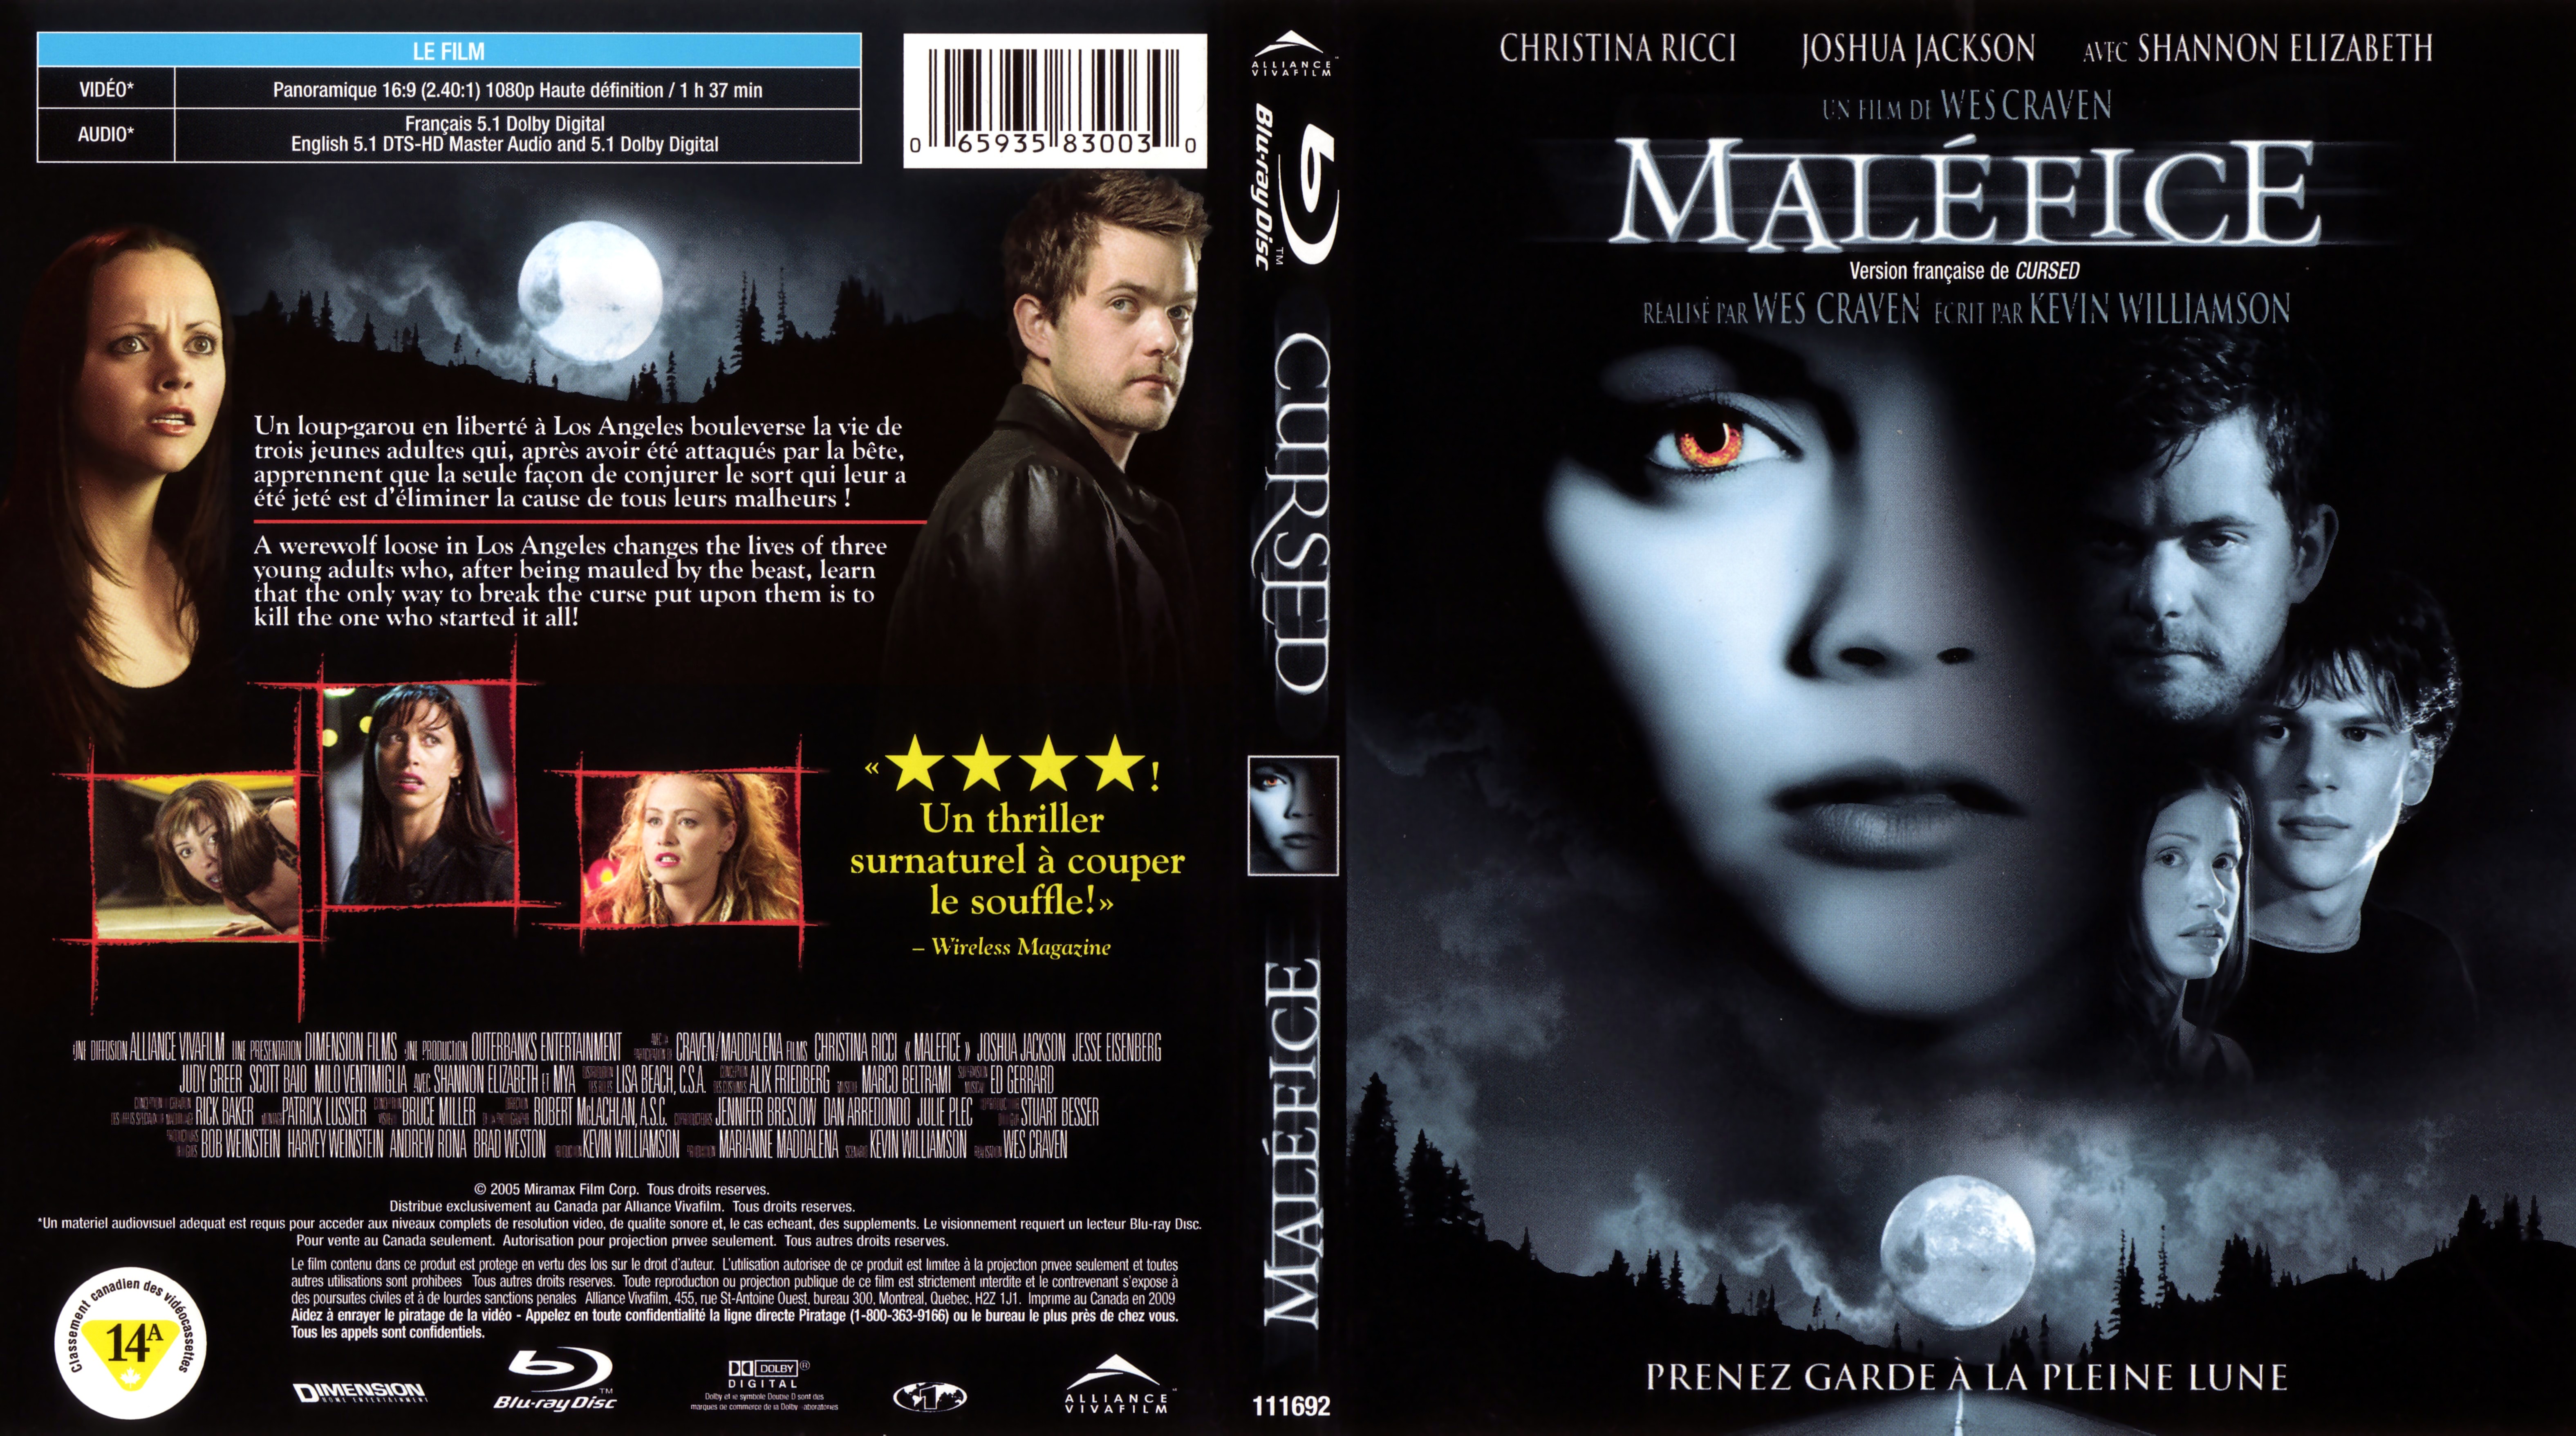 Jaquette DVD Malefice - Cursed (Canadienne) (BLU-RAY)